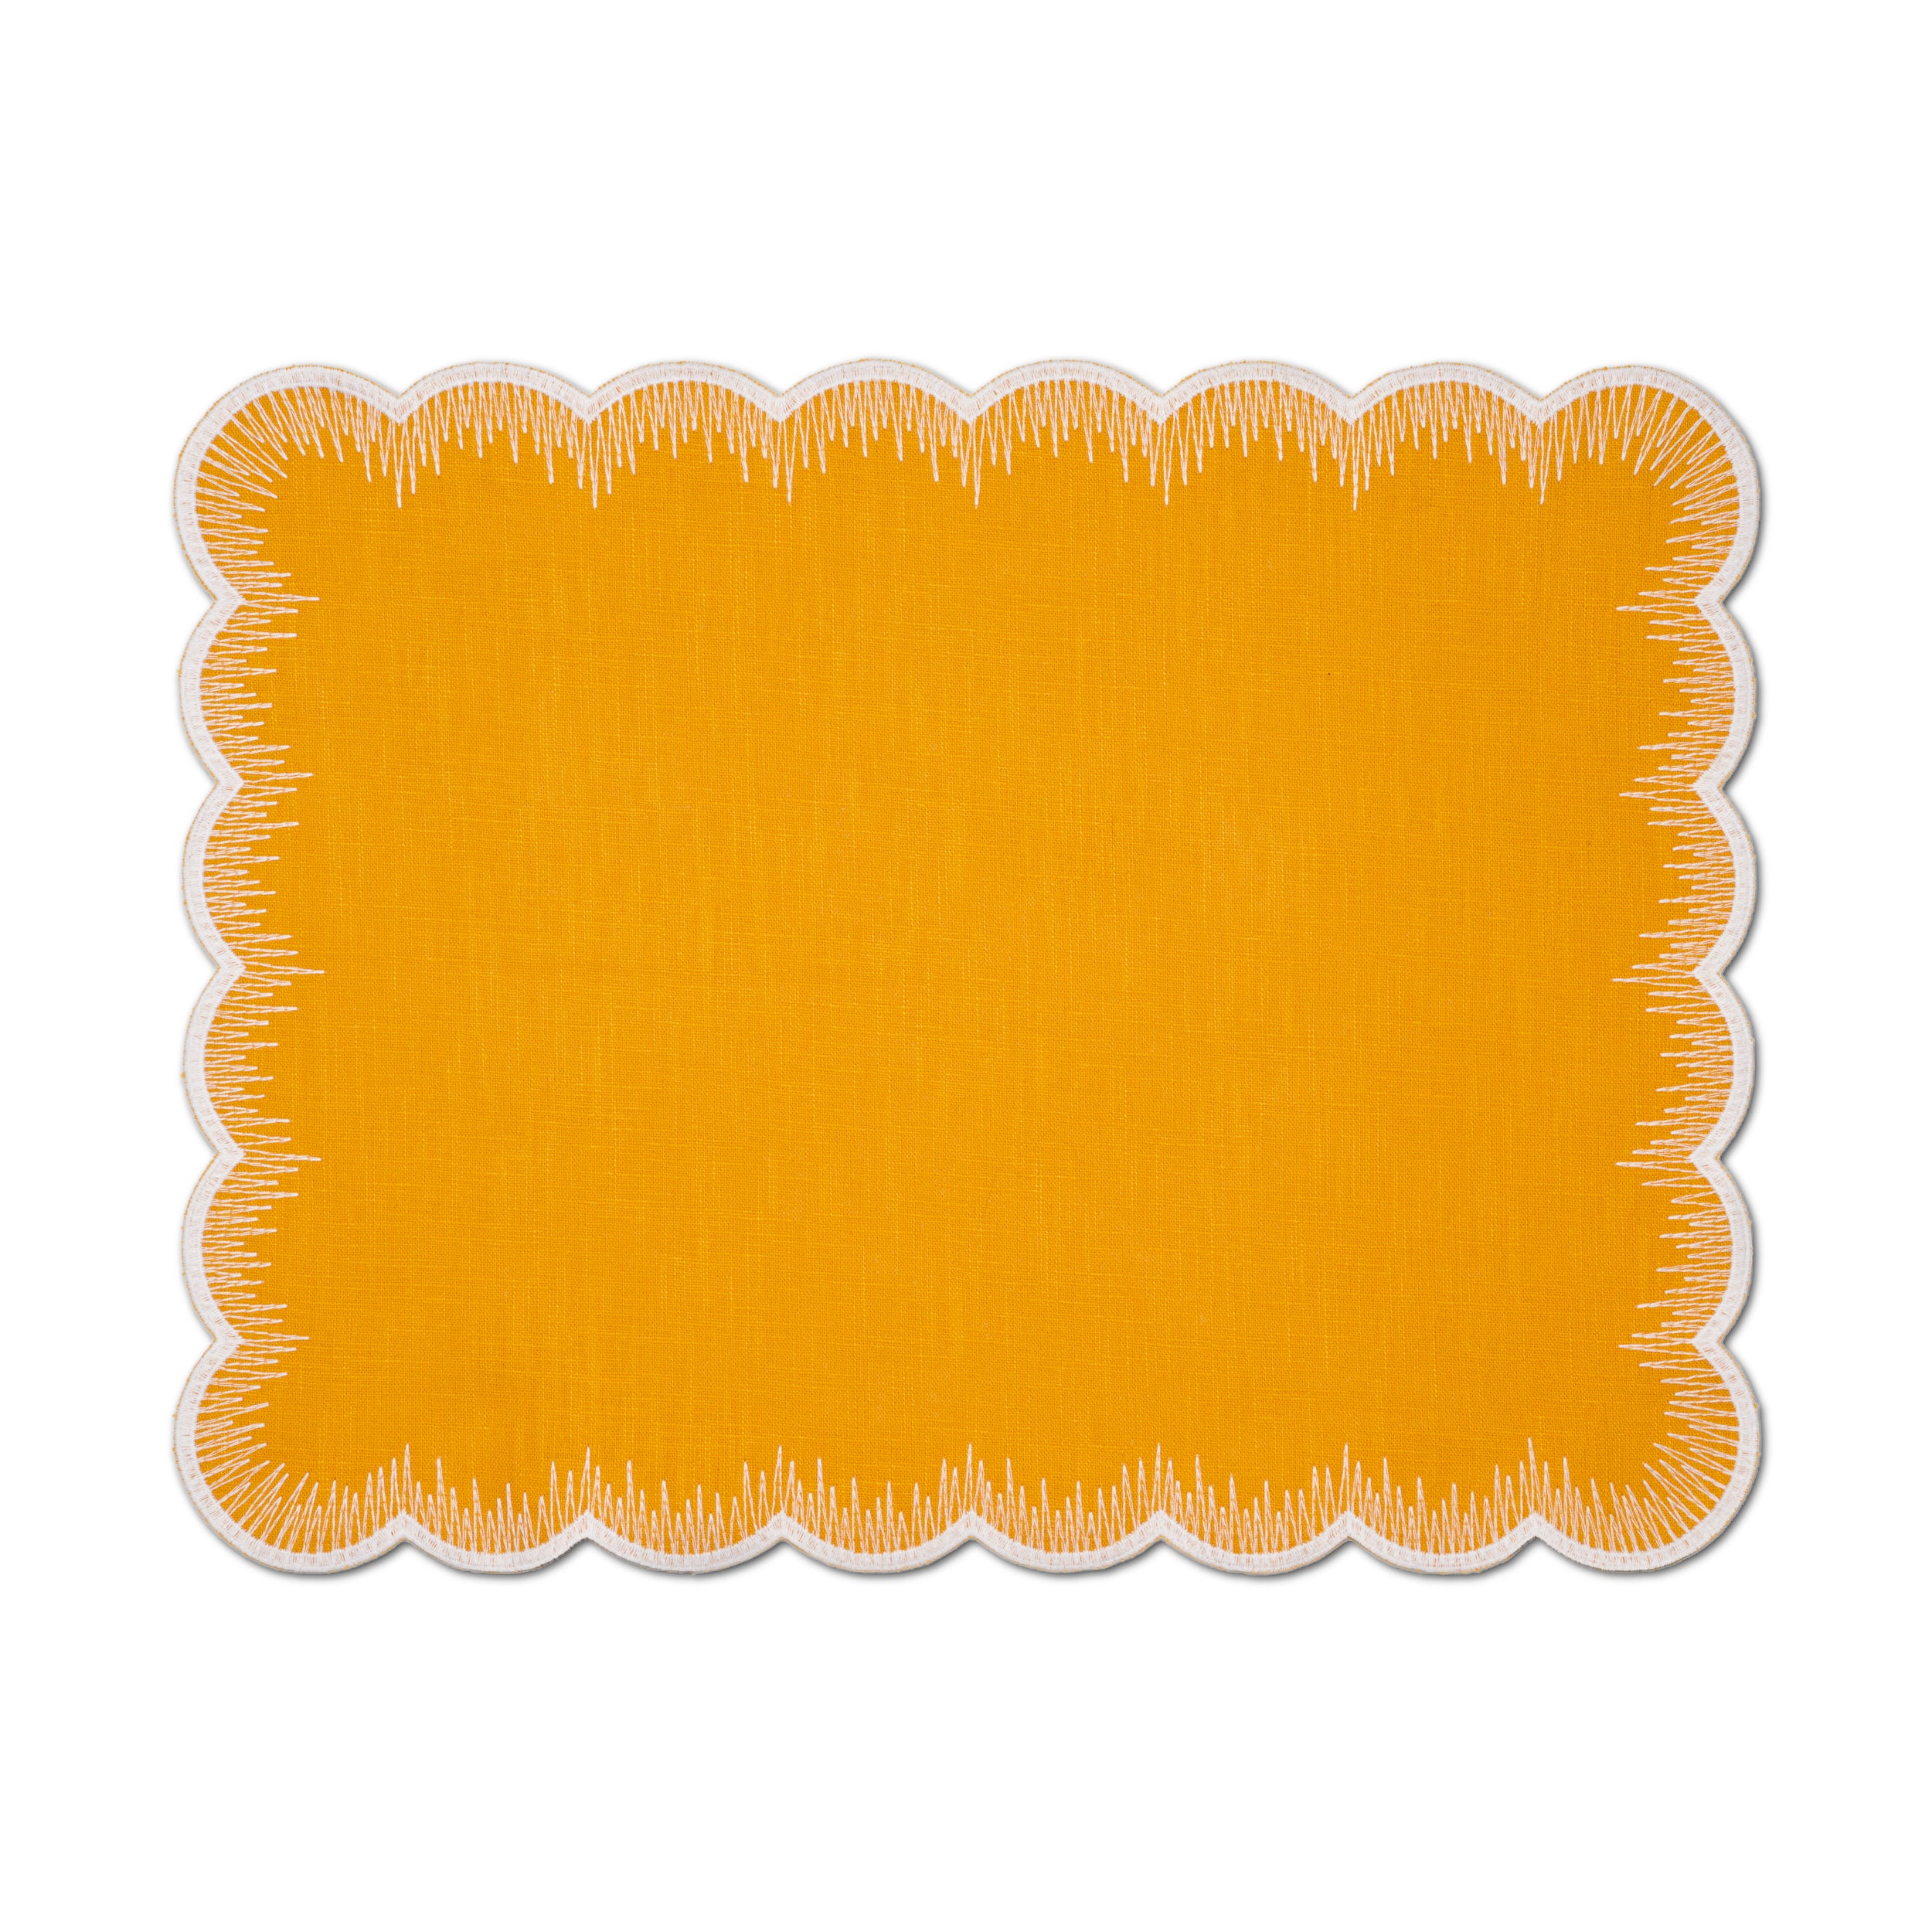 Heartbeat Placemat | Yellow - set of 4